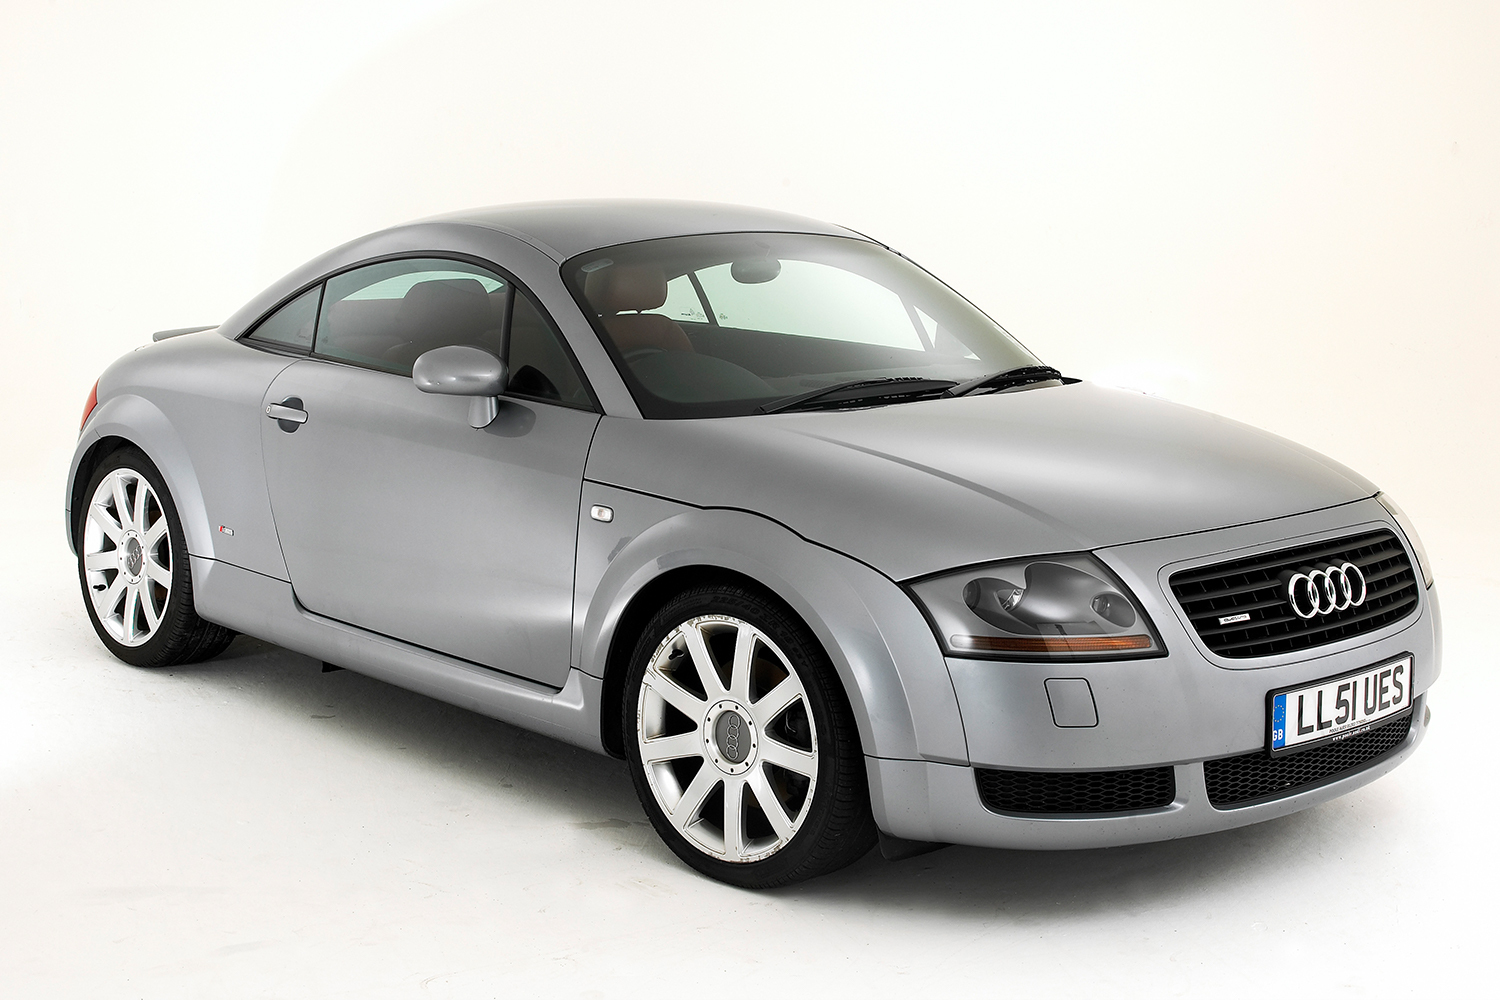 The 2001 Audi TT Coupe.